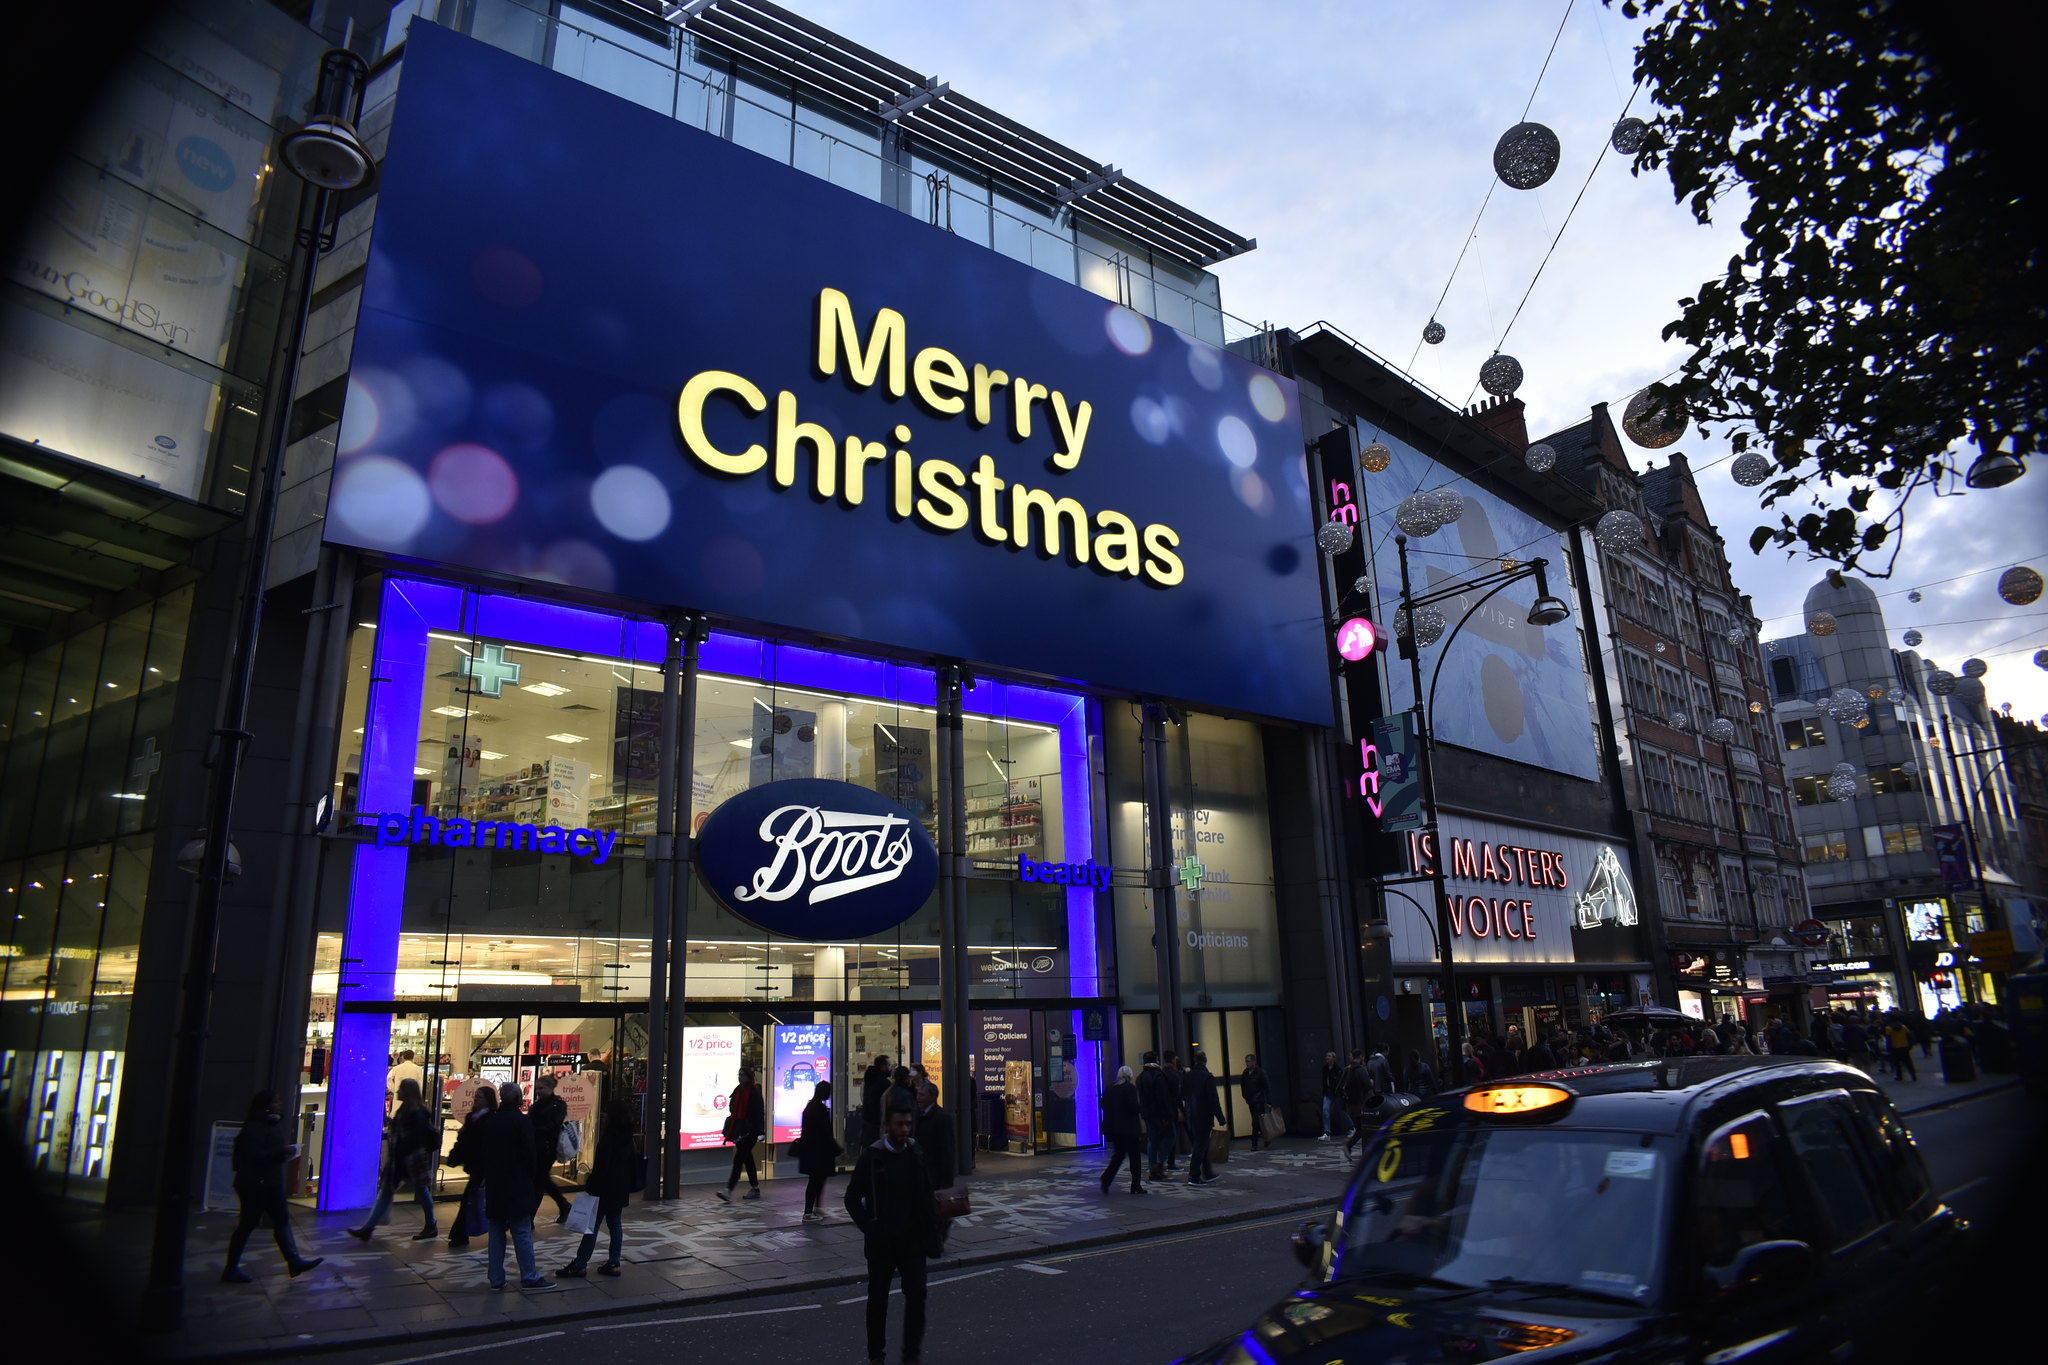 Boots Merry Christmas Signage